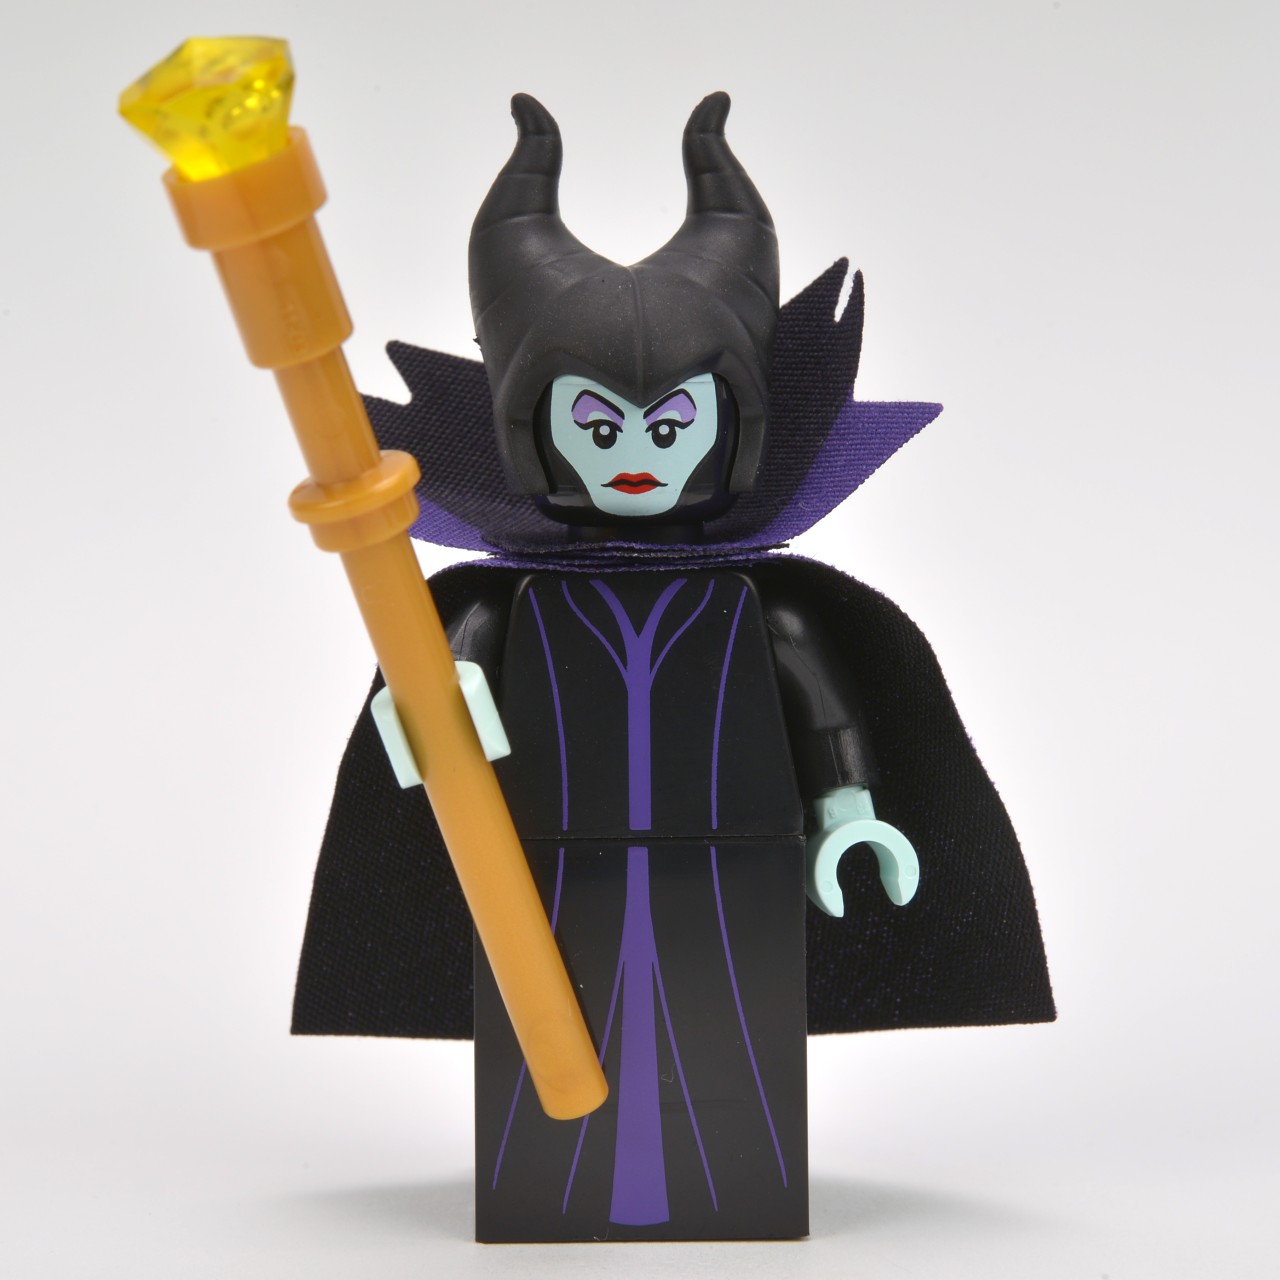 LEGO-MINIFIGURES  DISNEY X 1 GOLD STAFF FOR MALEFICENT FROM LEGO DISNEY PARTS 